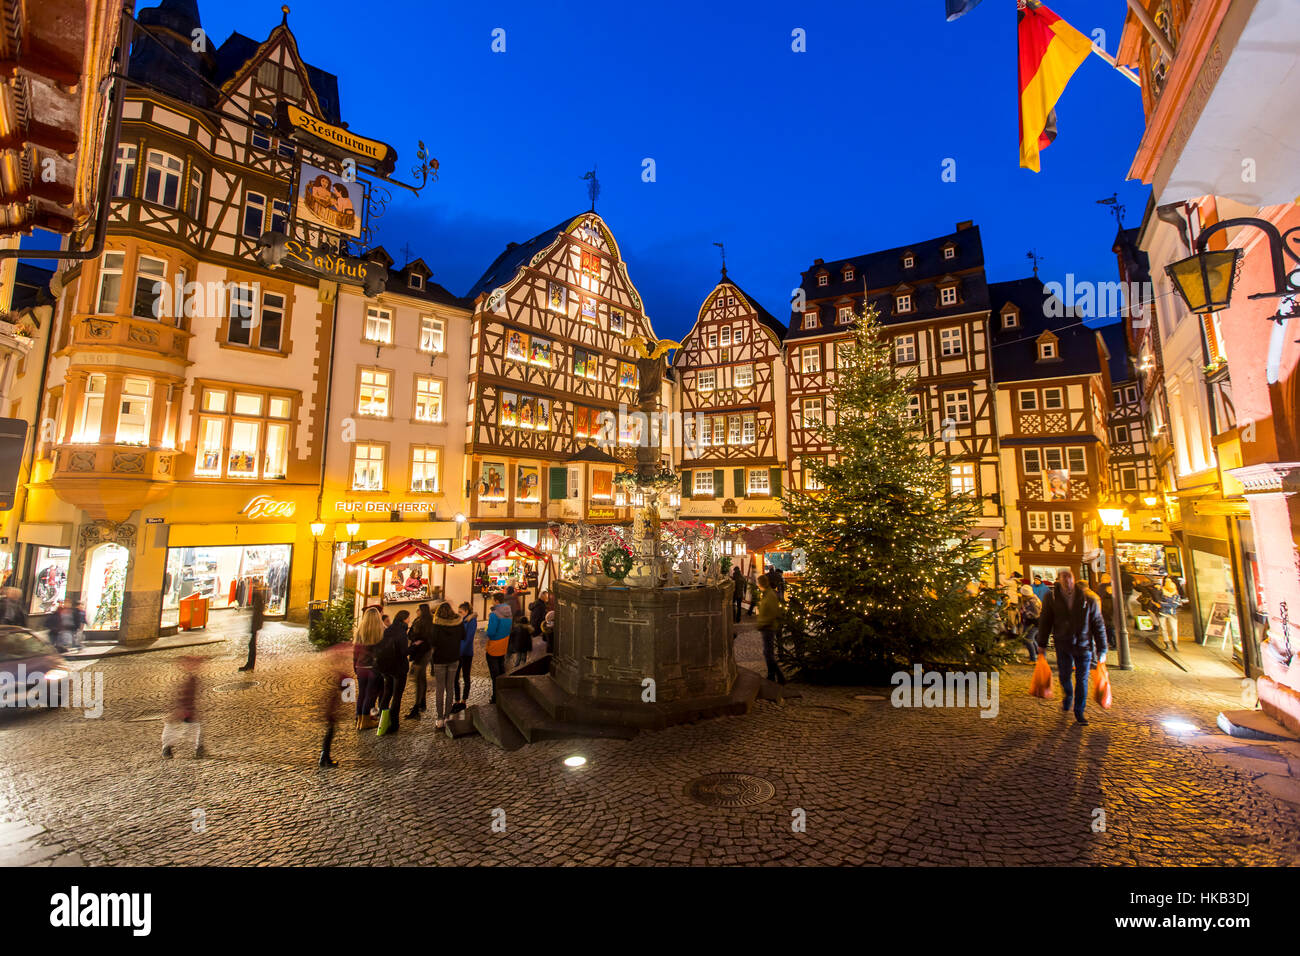 Christmas market in the old town of Bernkastel-Kues, Germany, Moselle valley, Stock Photo